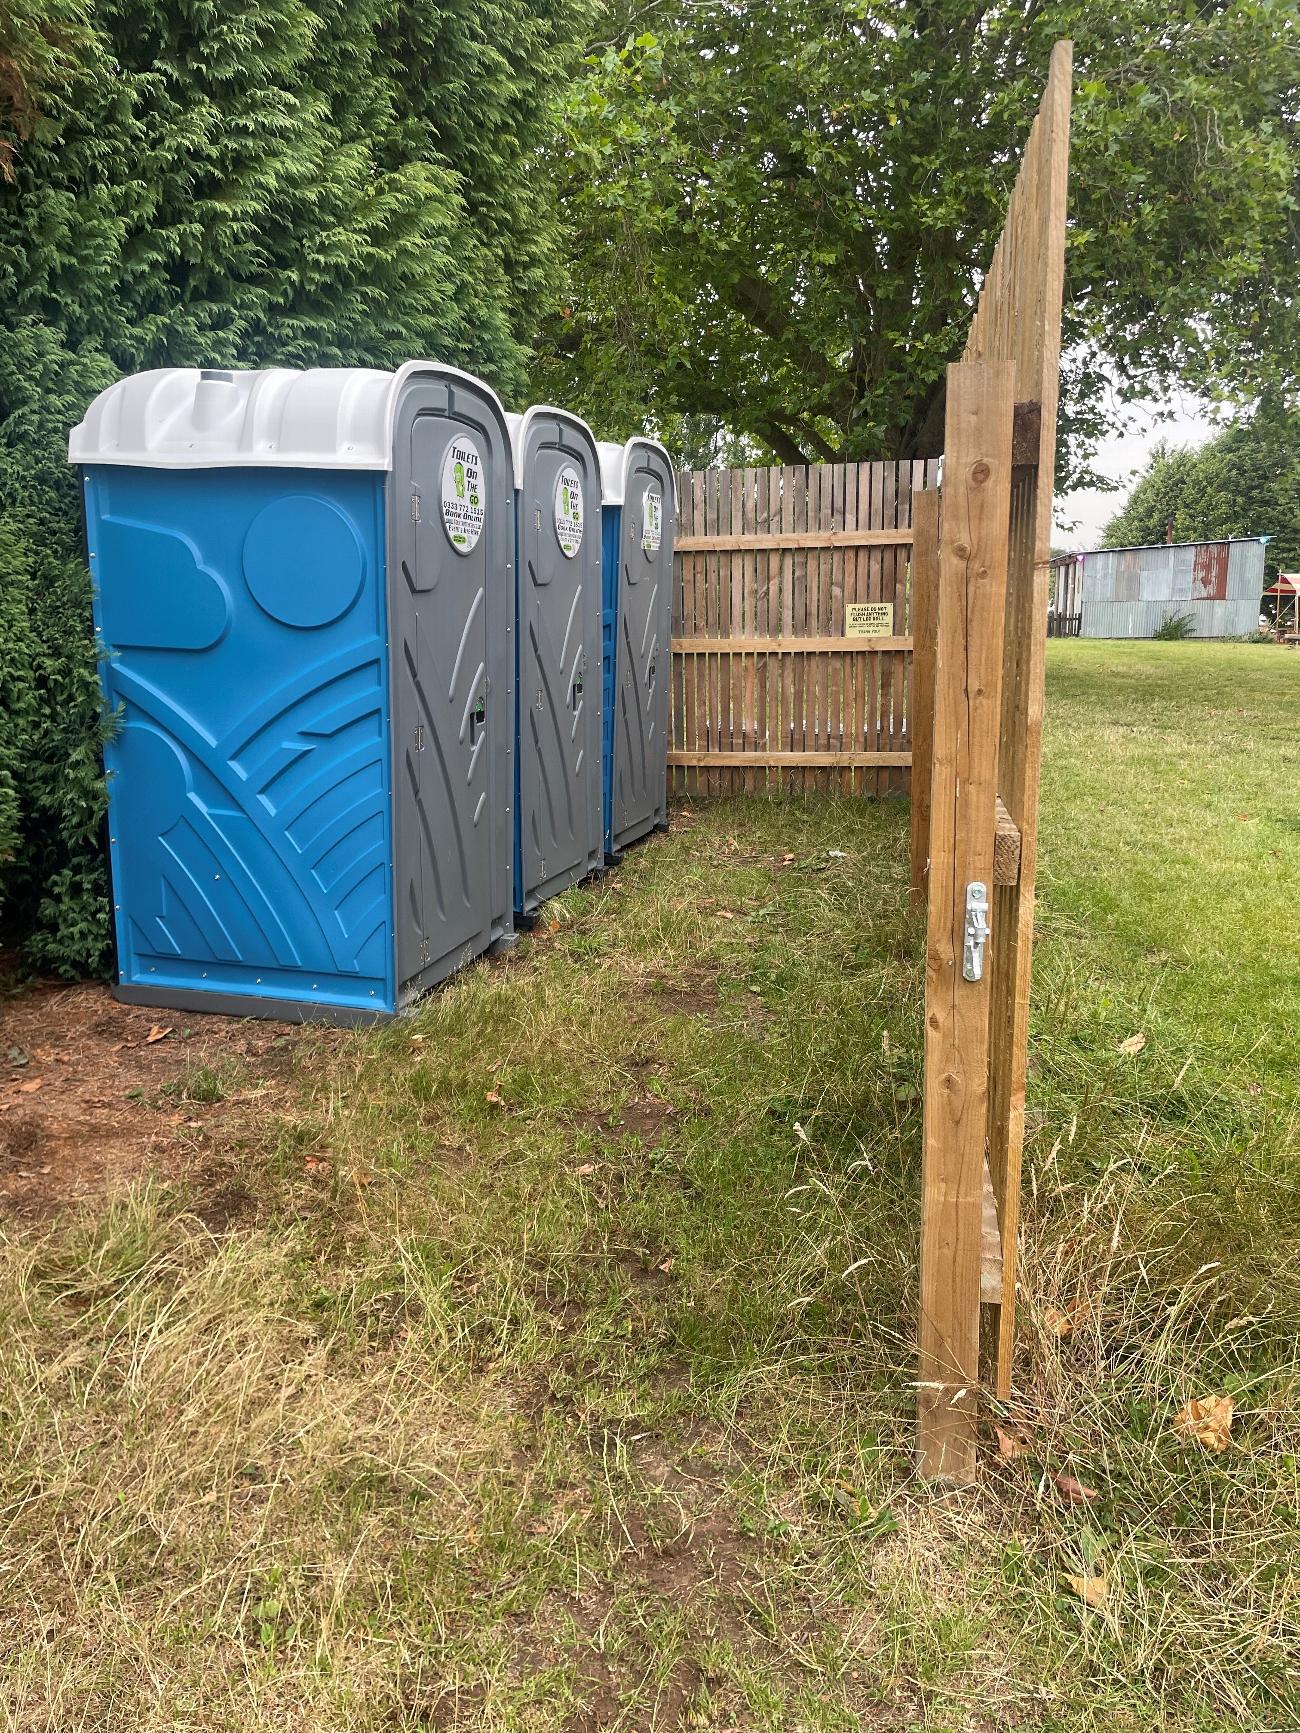 Gallery | Portable Toilet Loo Hire Rental Company in North West uk and Manchester gallery image 40